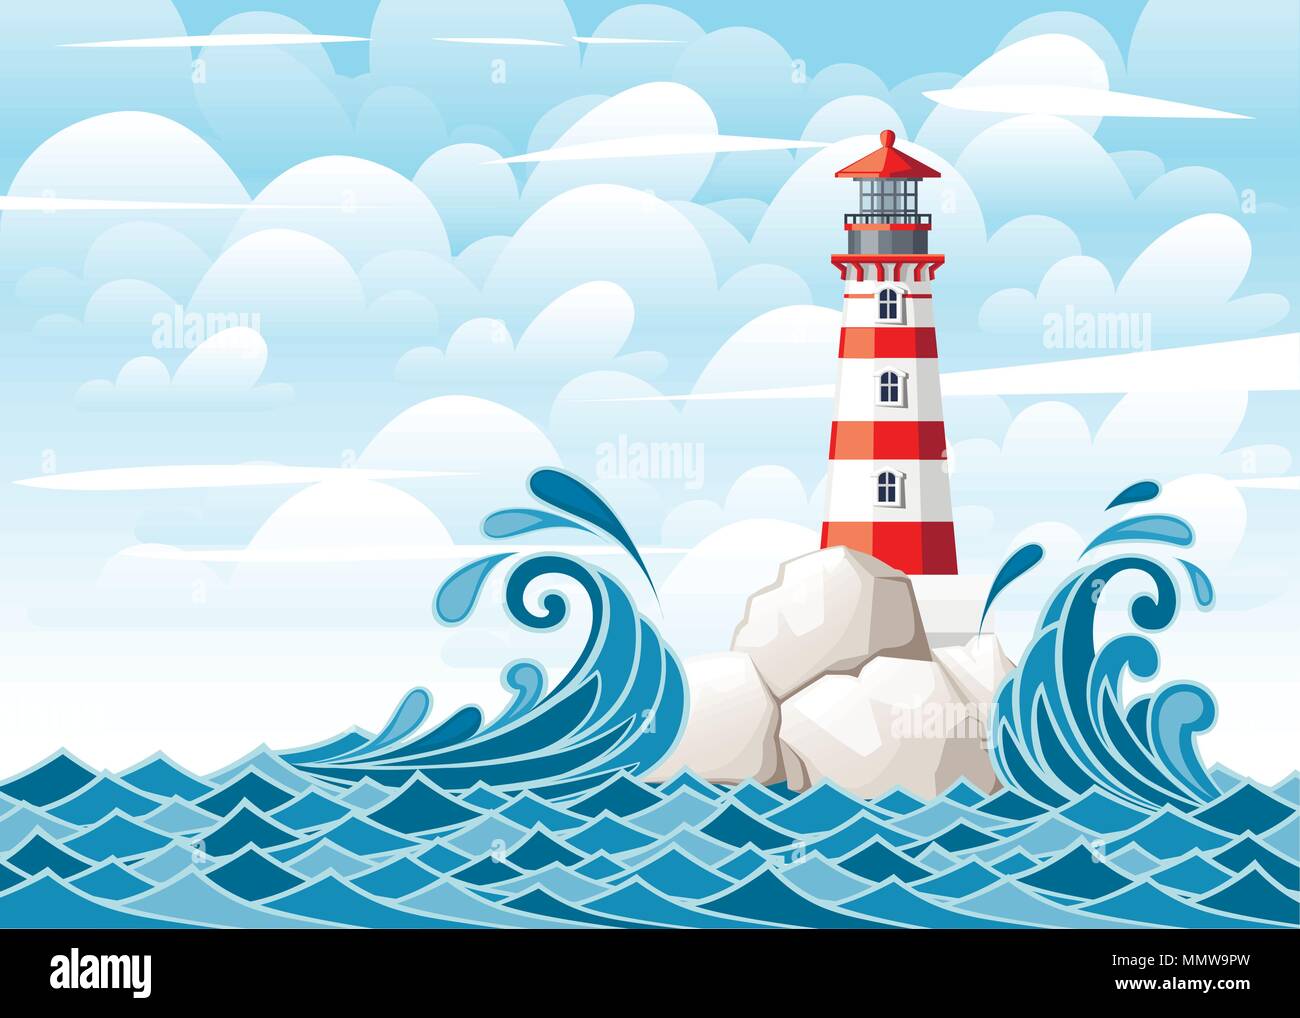 Stormy sea with lighthouse on rock stones island. Nature or marine design. Flat style. Vector illustration with sky and clouds background. Stock Vector